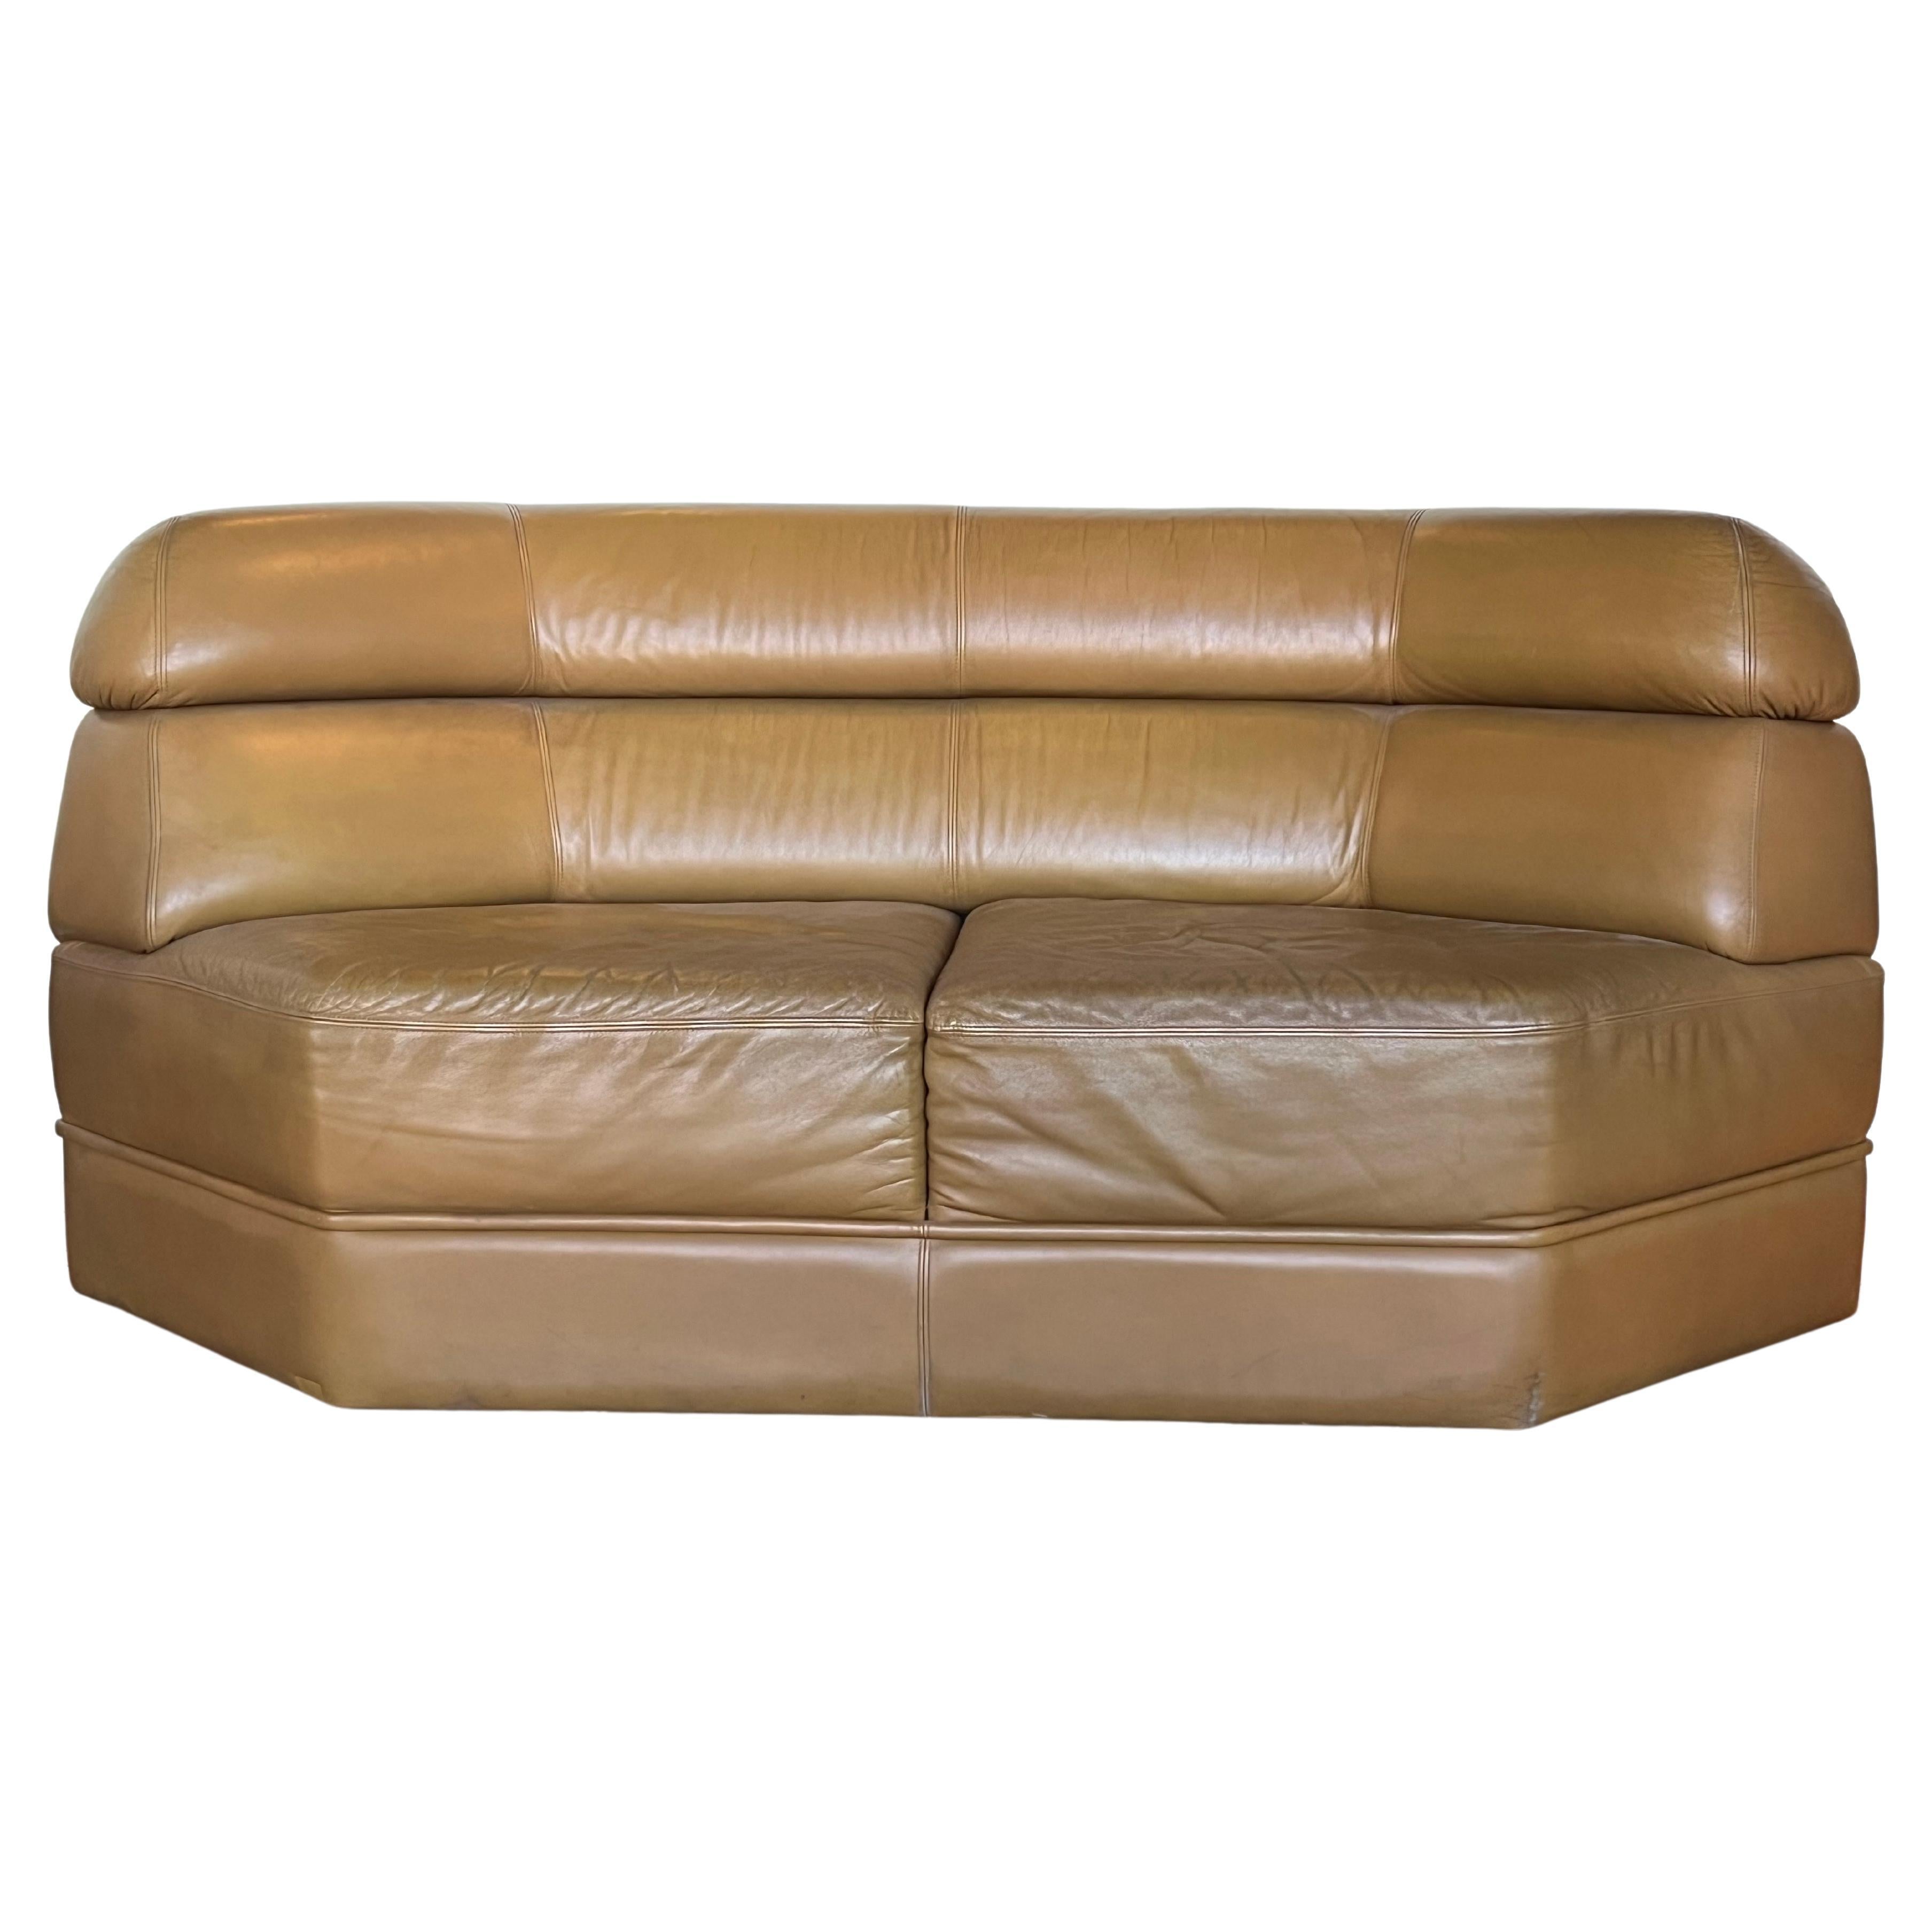 1970’s, French Leather Sofa For Sale